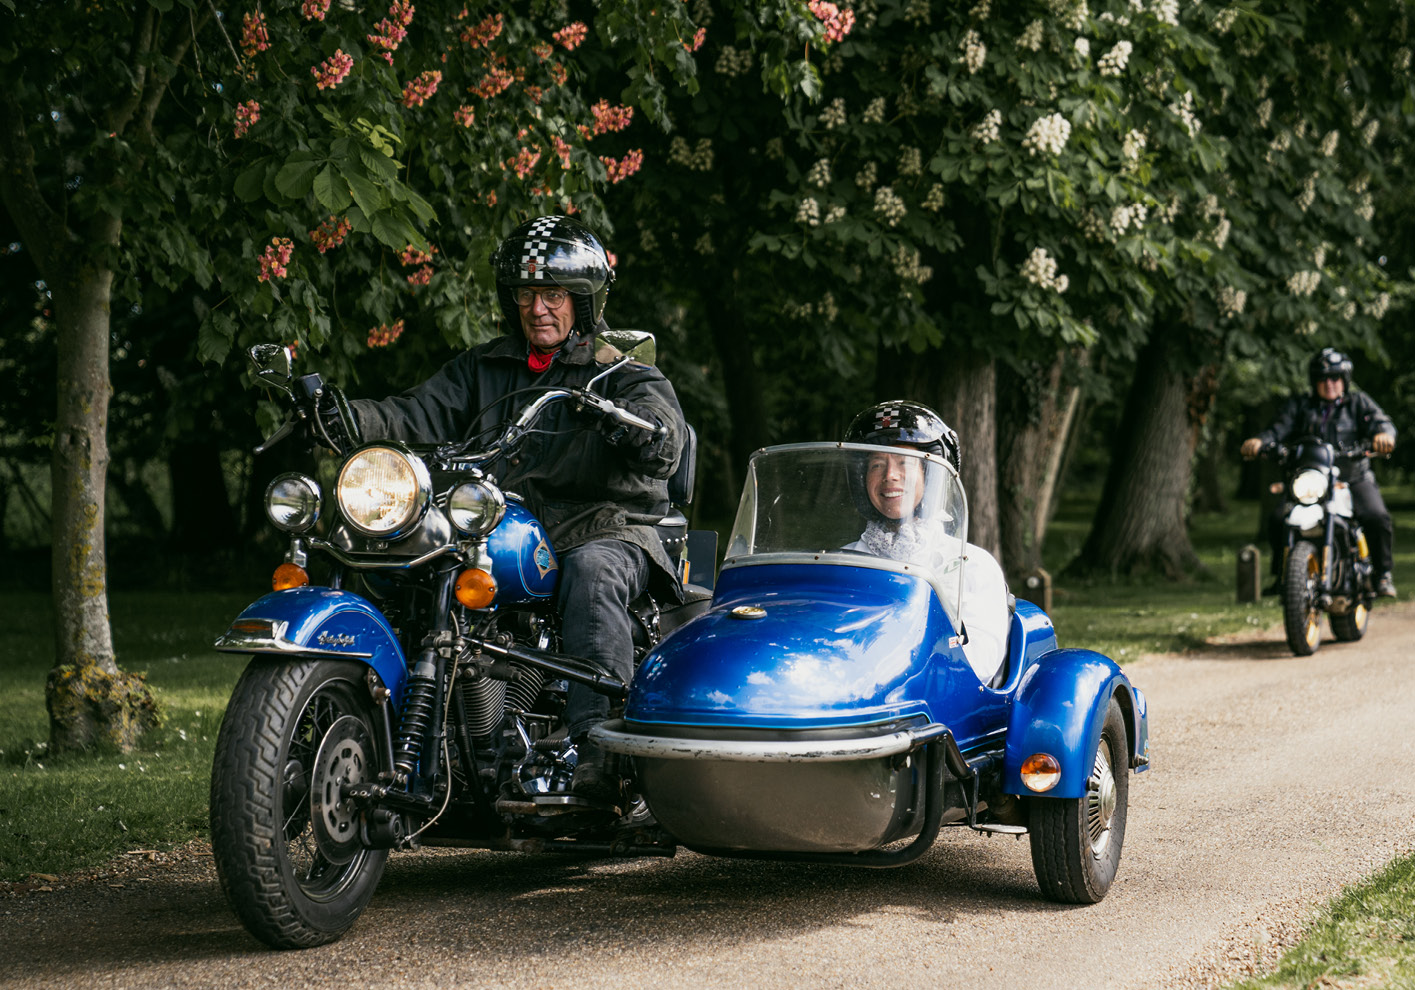 Bikers take part in the Distinguished Gentleman's Ride